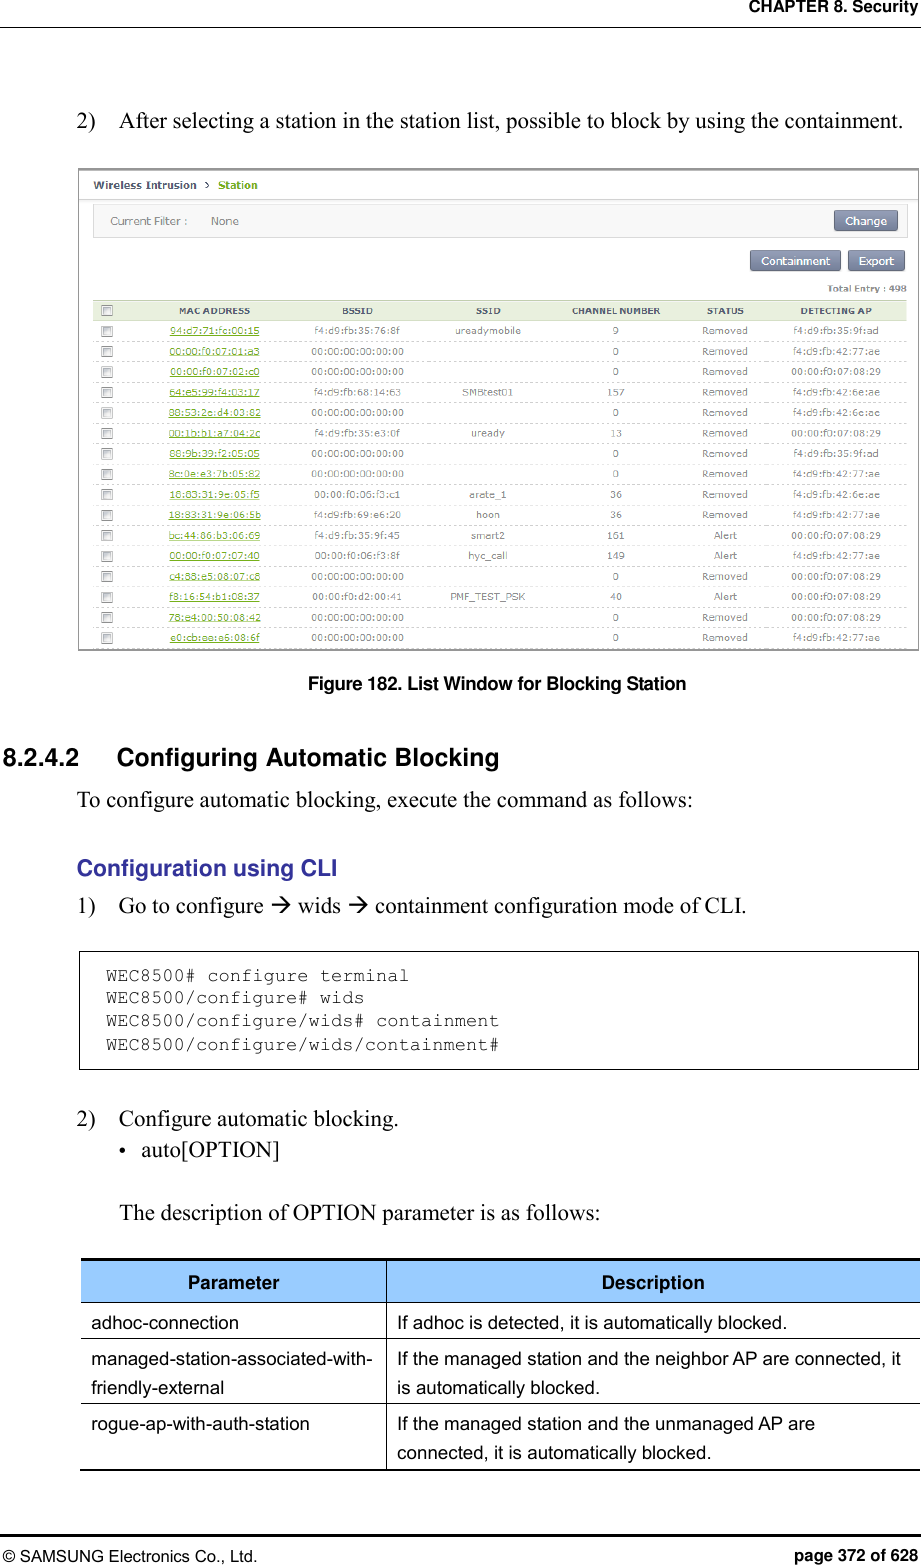 CHAPTER 8. Security © SAMSUNG Electronics Co., Ltd.  page 372 of 628 2)    After selecting a station in the station list, possible to block by using the containment.  Figure 182. List Window for Blocking Station  8.2.4.2  Configuring Automatic Blocking To configure automatic blocking, execute the command as follows:  Configuration using CLI 1)    Go to configure  wids  containment configuration mode of CLI.  WEC8500# configure terminal WEC8500/configure# wids WEC8500/configure/wids# containment WEC8500/configure/wids/containment#  2)    Configure automatic blocking.  auto[OPTION]  The description of OPTION parameter is as follows:    Parameter Description adhoc-connection If adhoc is detected, it is automatically blocked. managed-station-associated-with-friendly-external If the managed station and the neighbor AP are connected, it is automatically blocked. rogue-ap-with-auth-station If the managed station and the unmanaged AP are connected, it is automatically blocked. 